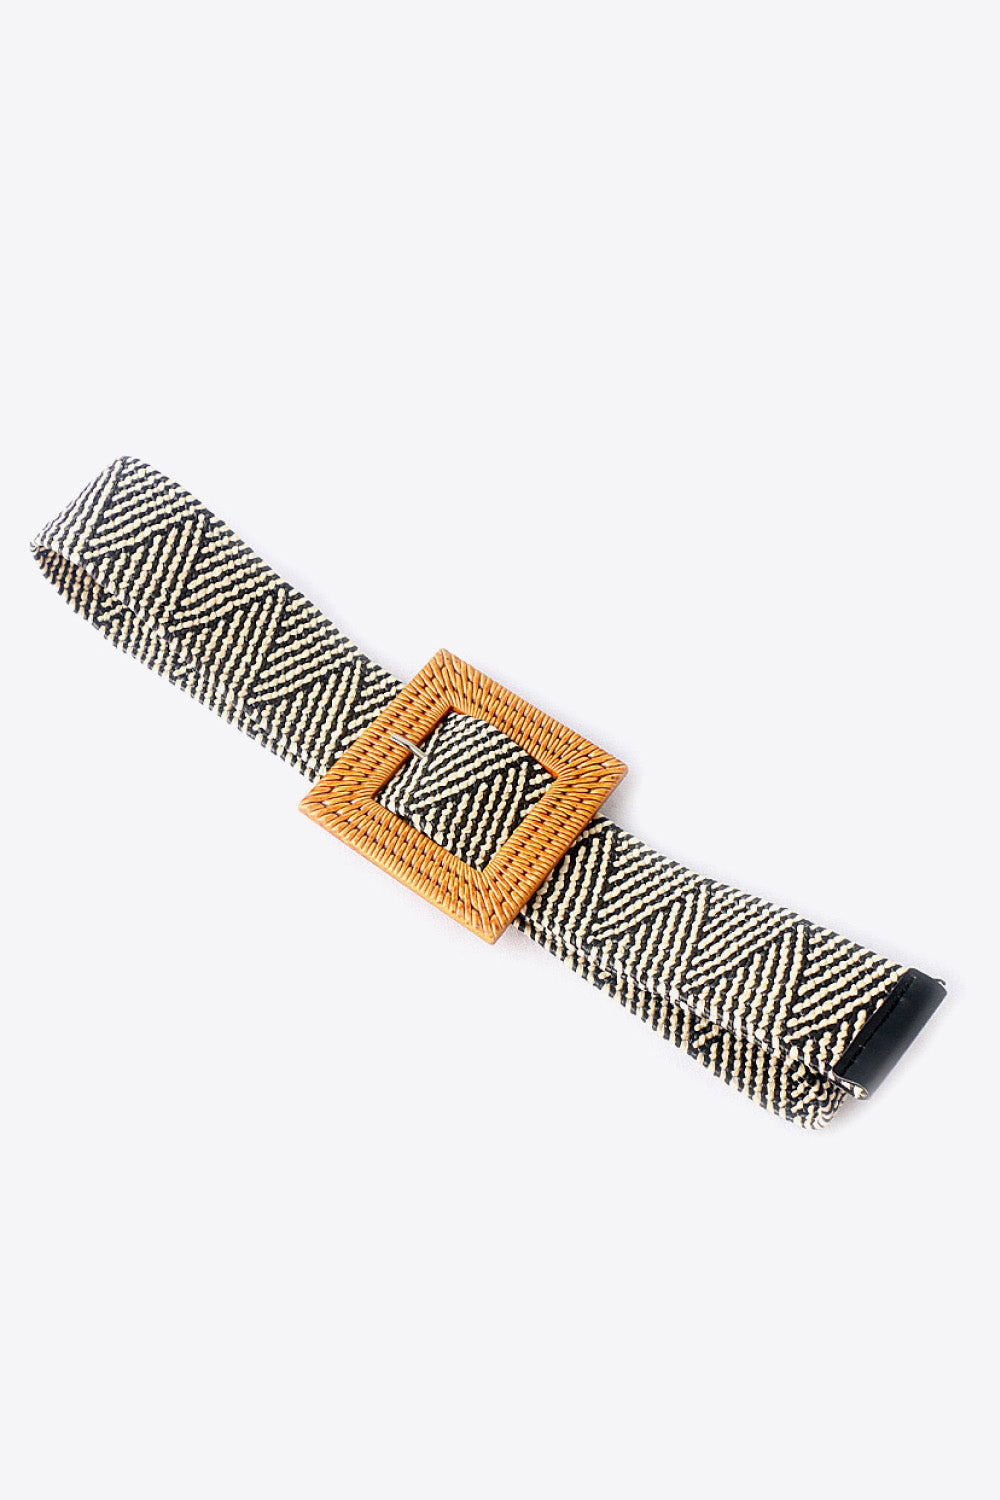 Square Buckle Elastic Braid Belt Print on any thing USA/STOD clothes